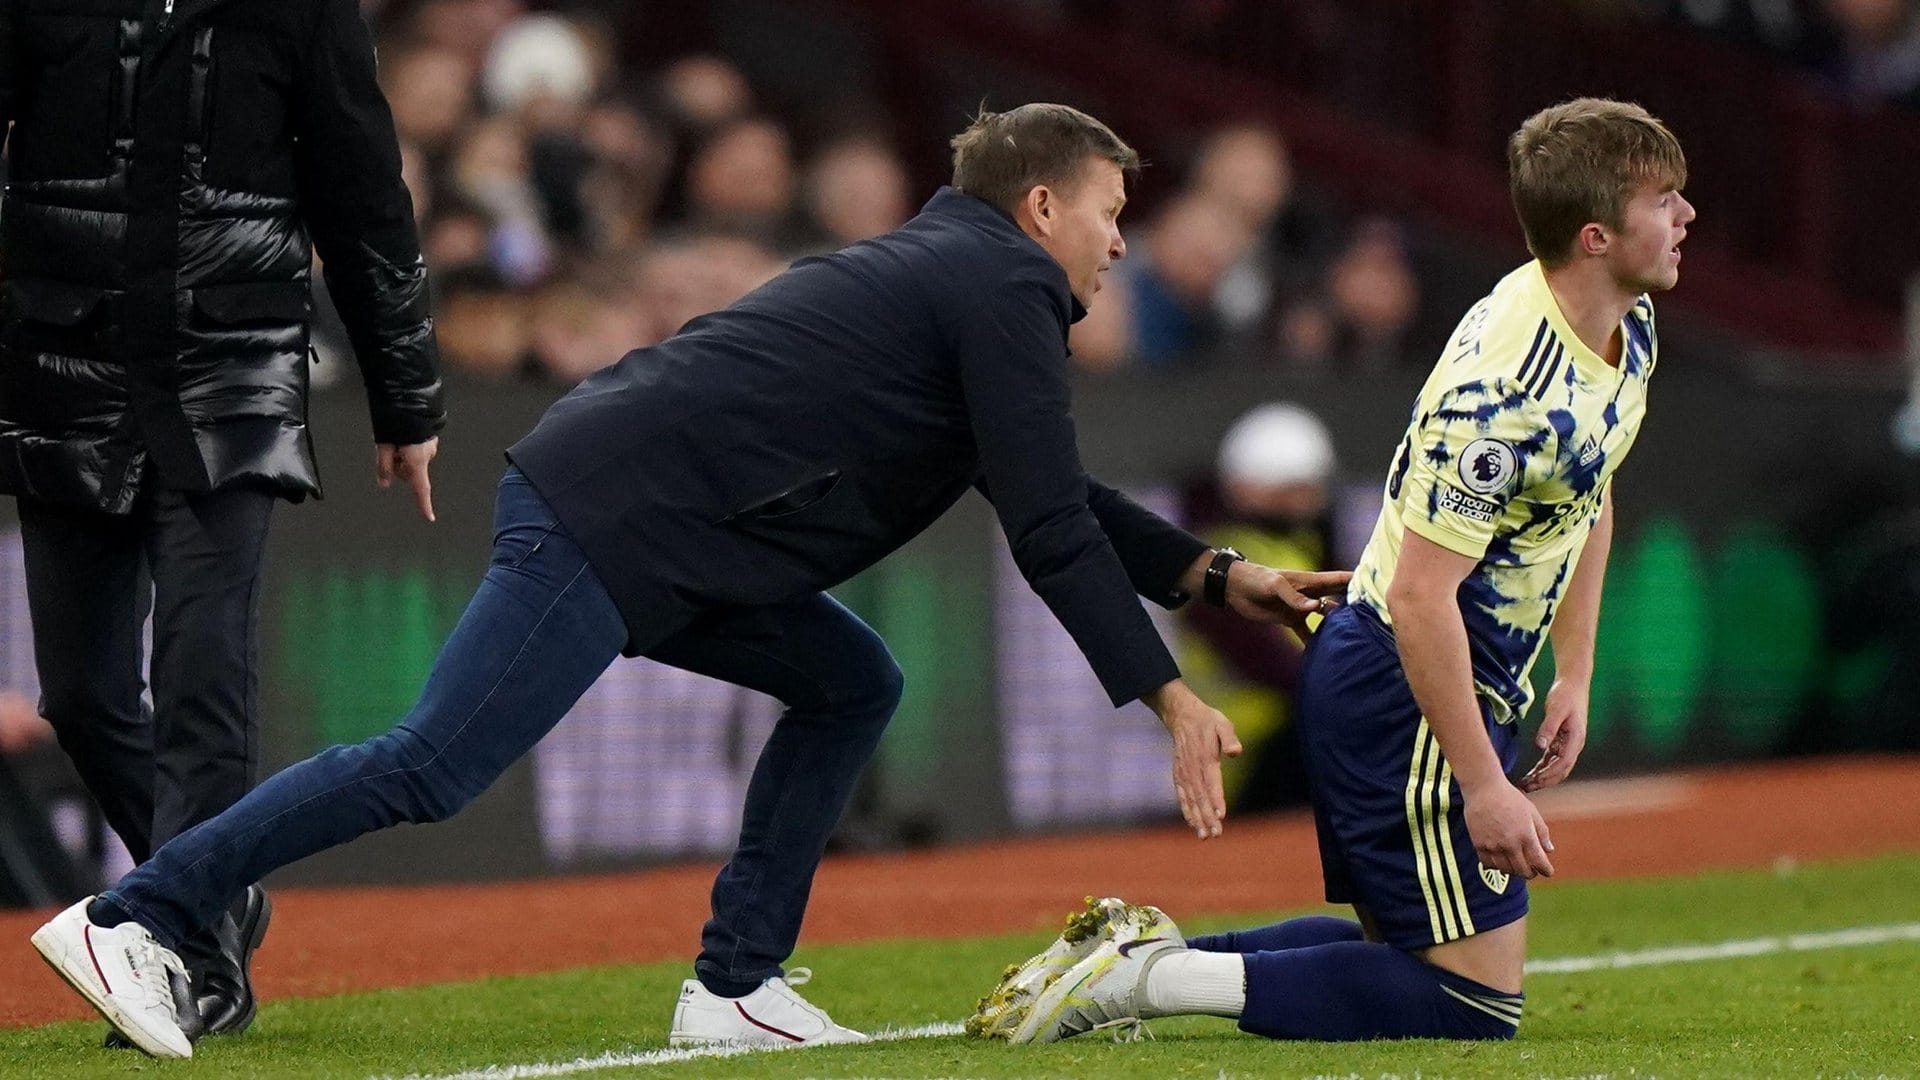 With Joffy Gelhardt down on his knees near the touchline in Leeds' game against Aston Villa, Jesse Marsch is leaning in from behind him with the encouraging butt-pat Joffy no doubt wanted